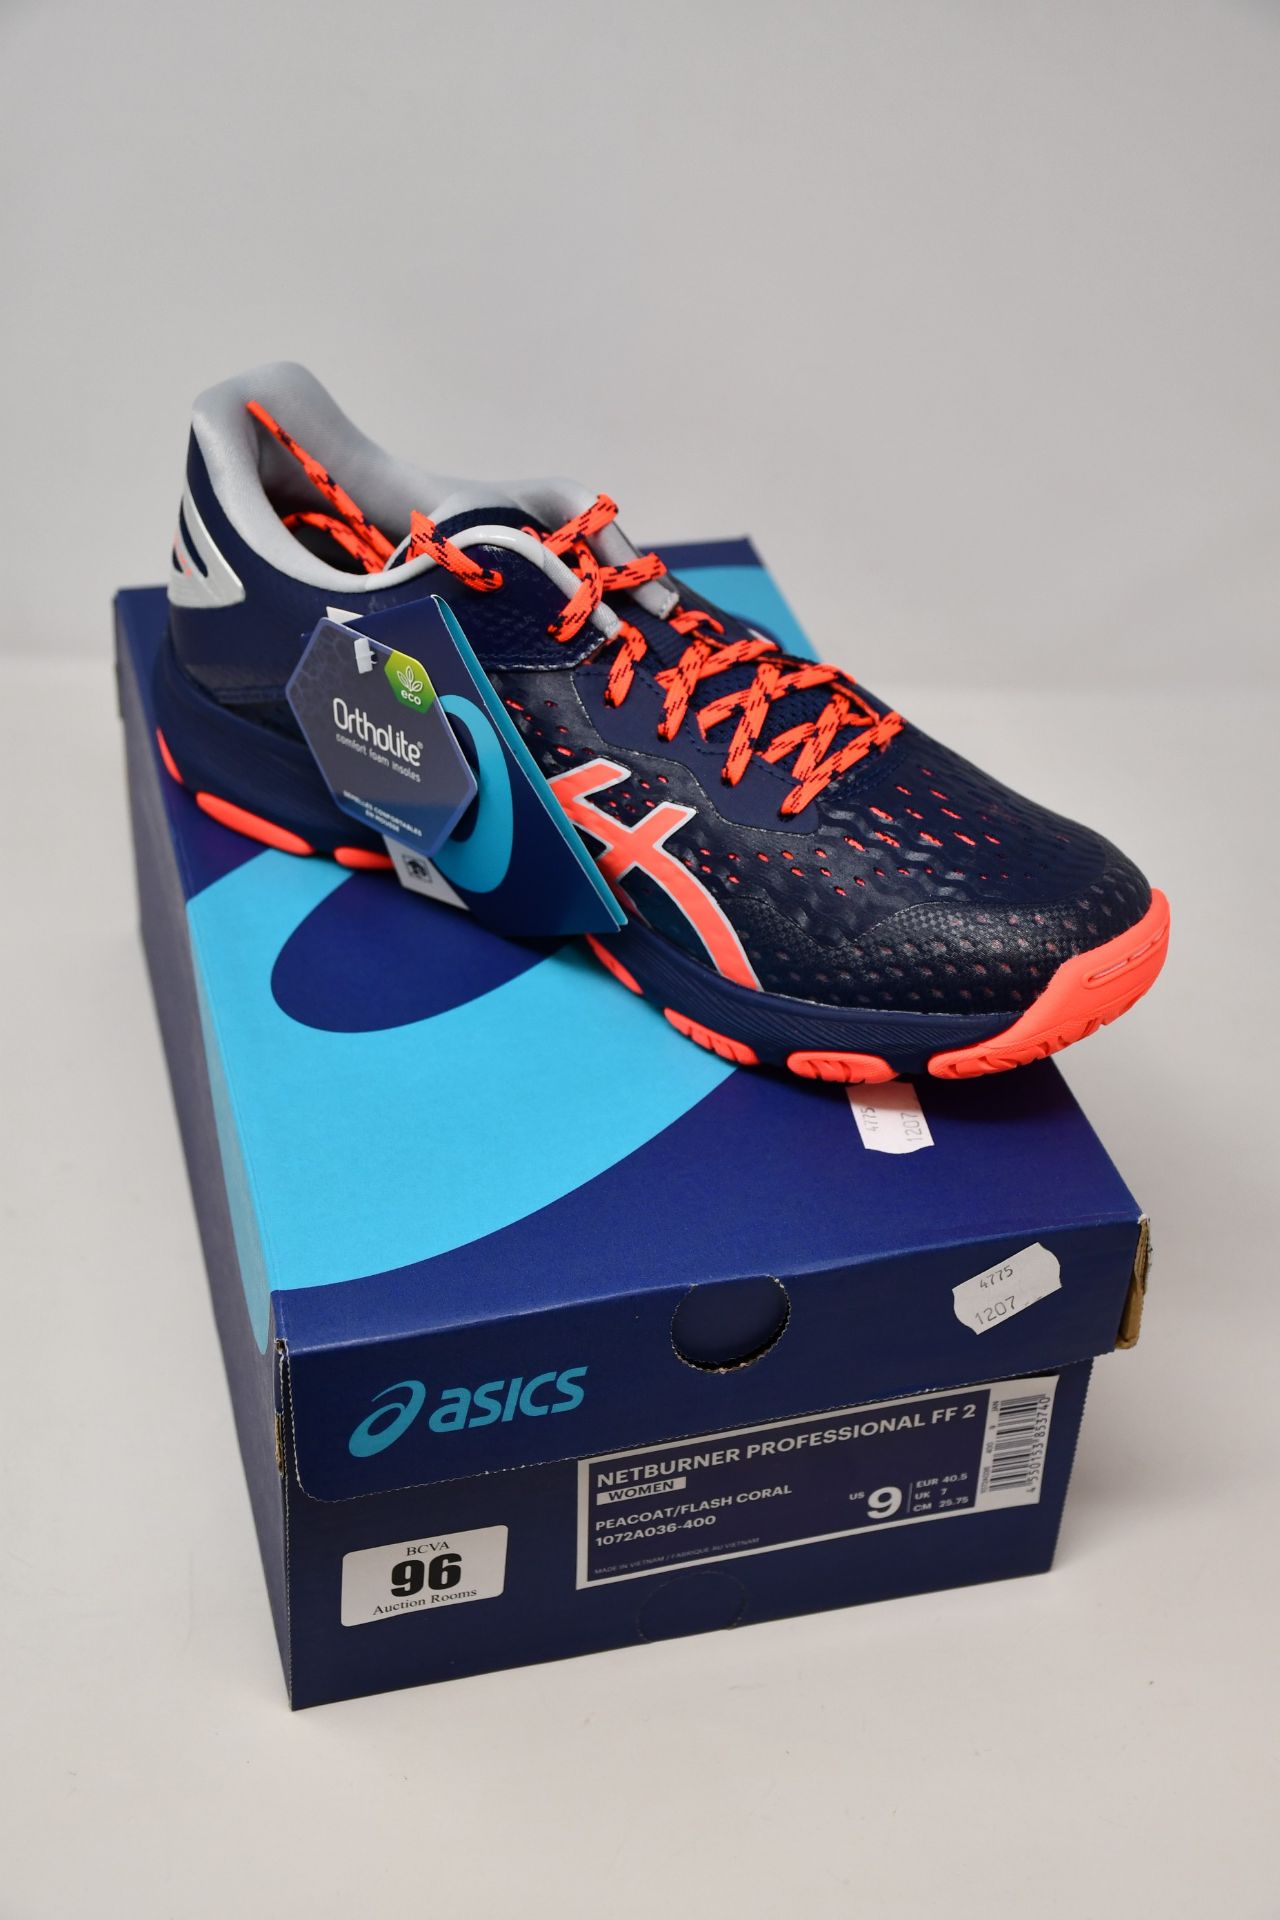 A pair of as new Asics Netburner Super FF 2 trainers (UK 7).